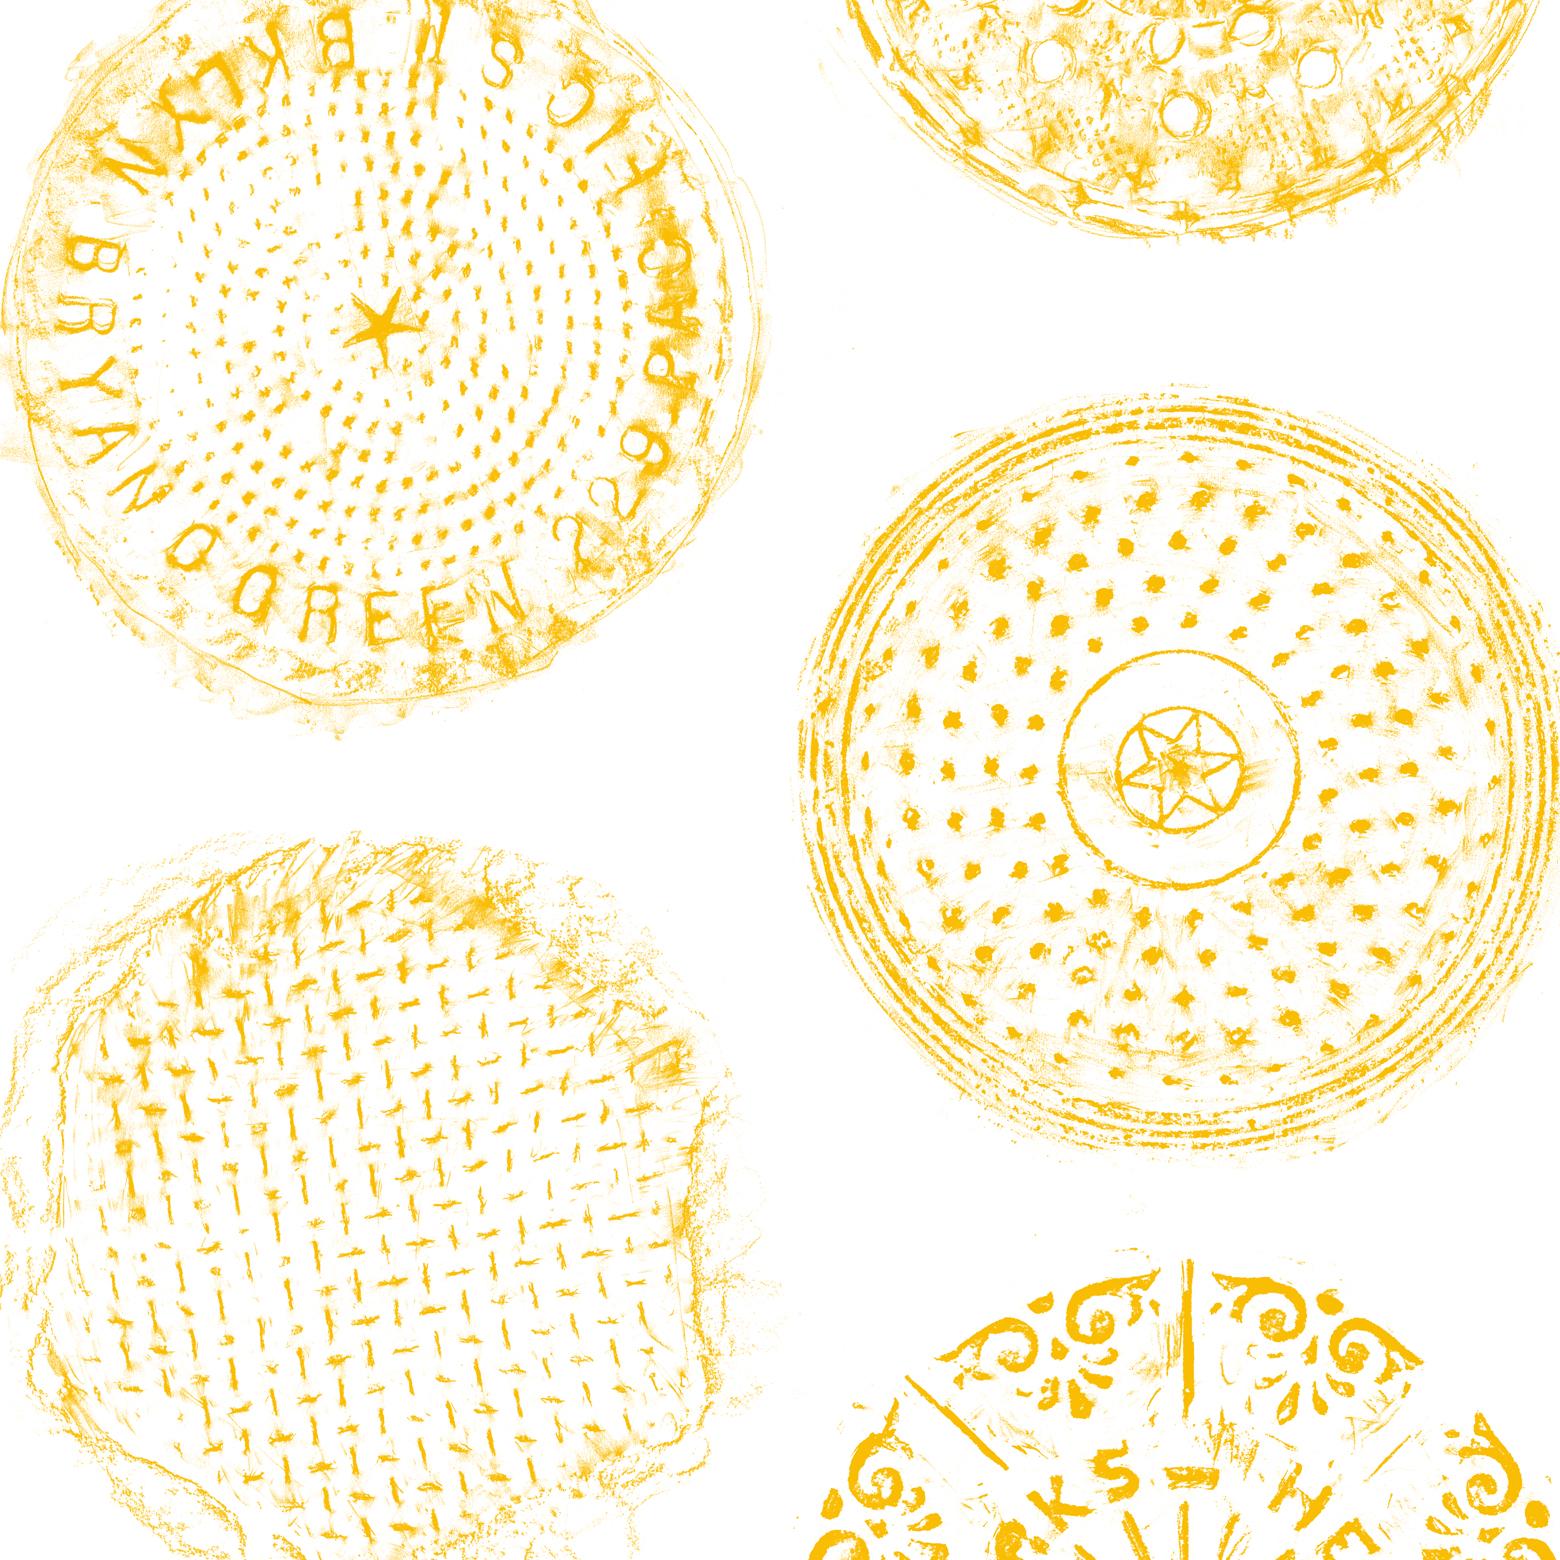 Contemporary Brooklyn Manhole Printed Wallpaper, White with Gold Manhole Cover For Sale